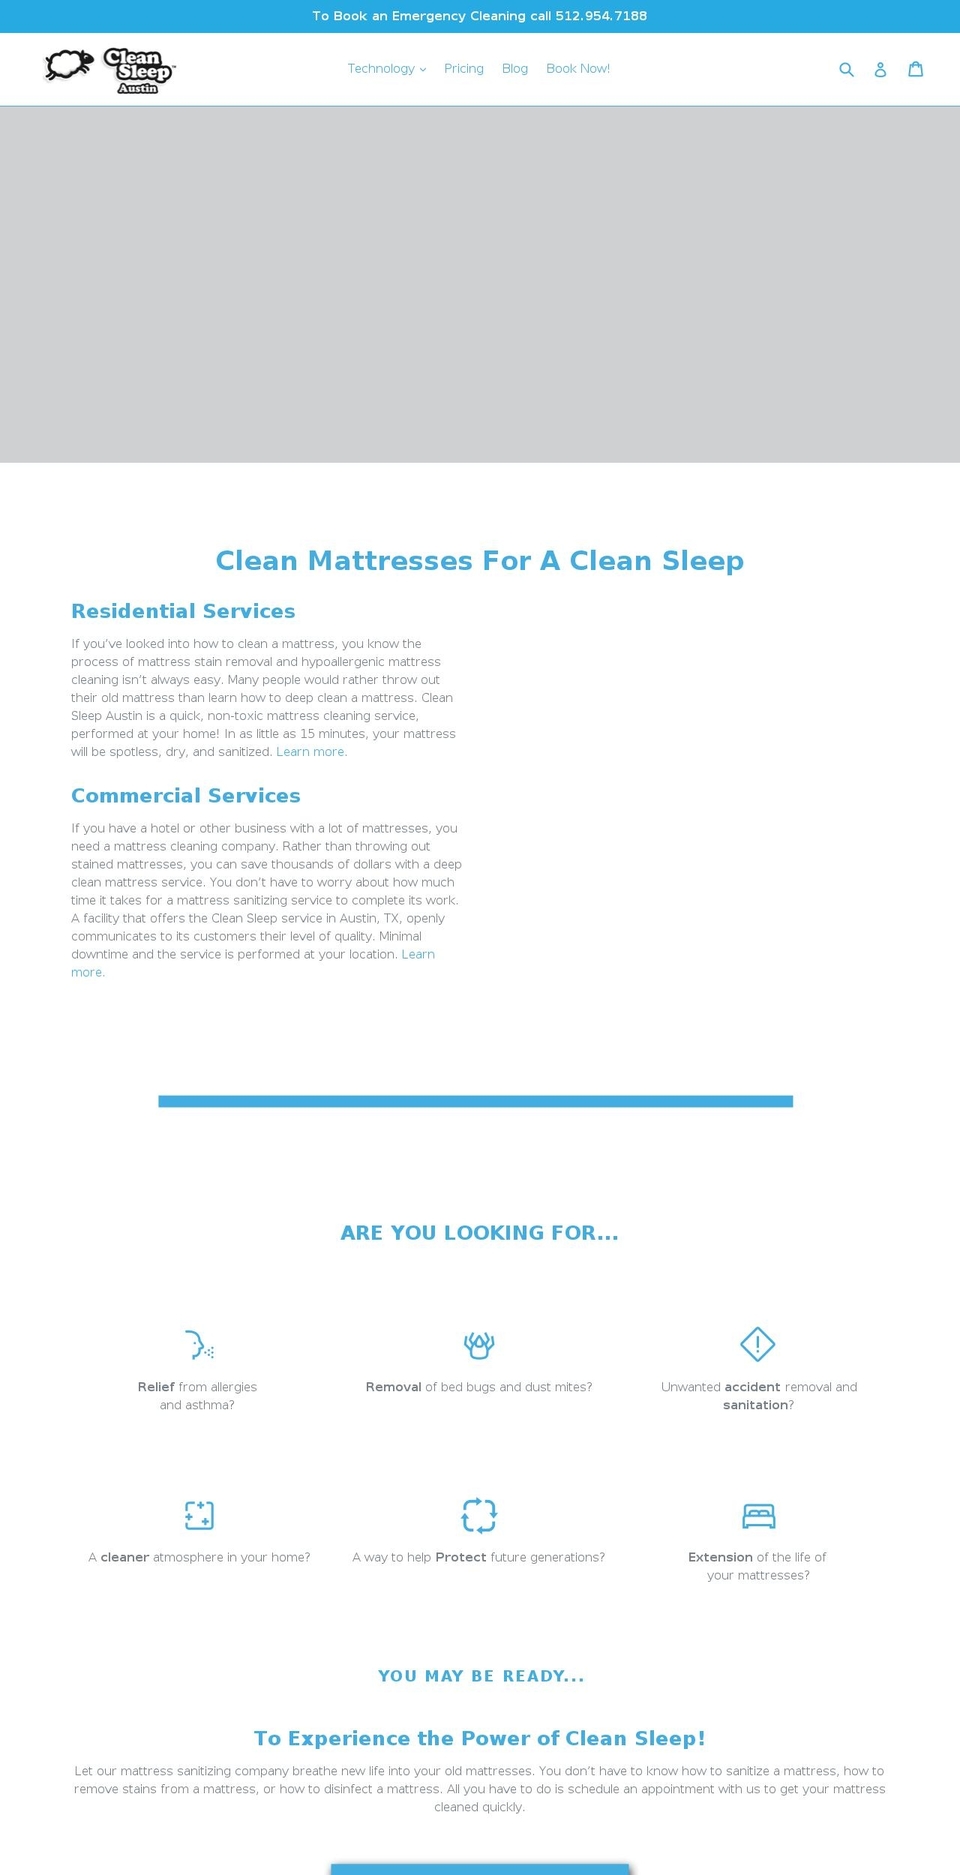 NEW Shopify theme site example cleansleepaustin.com